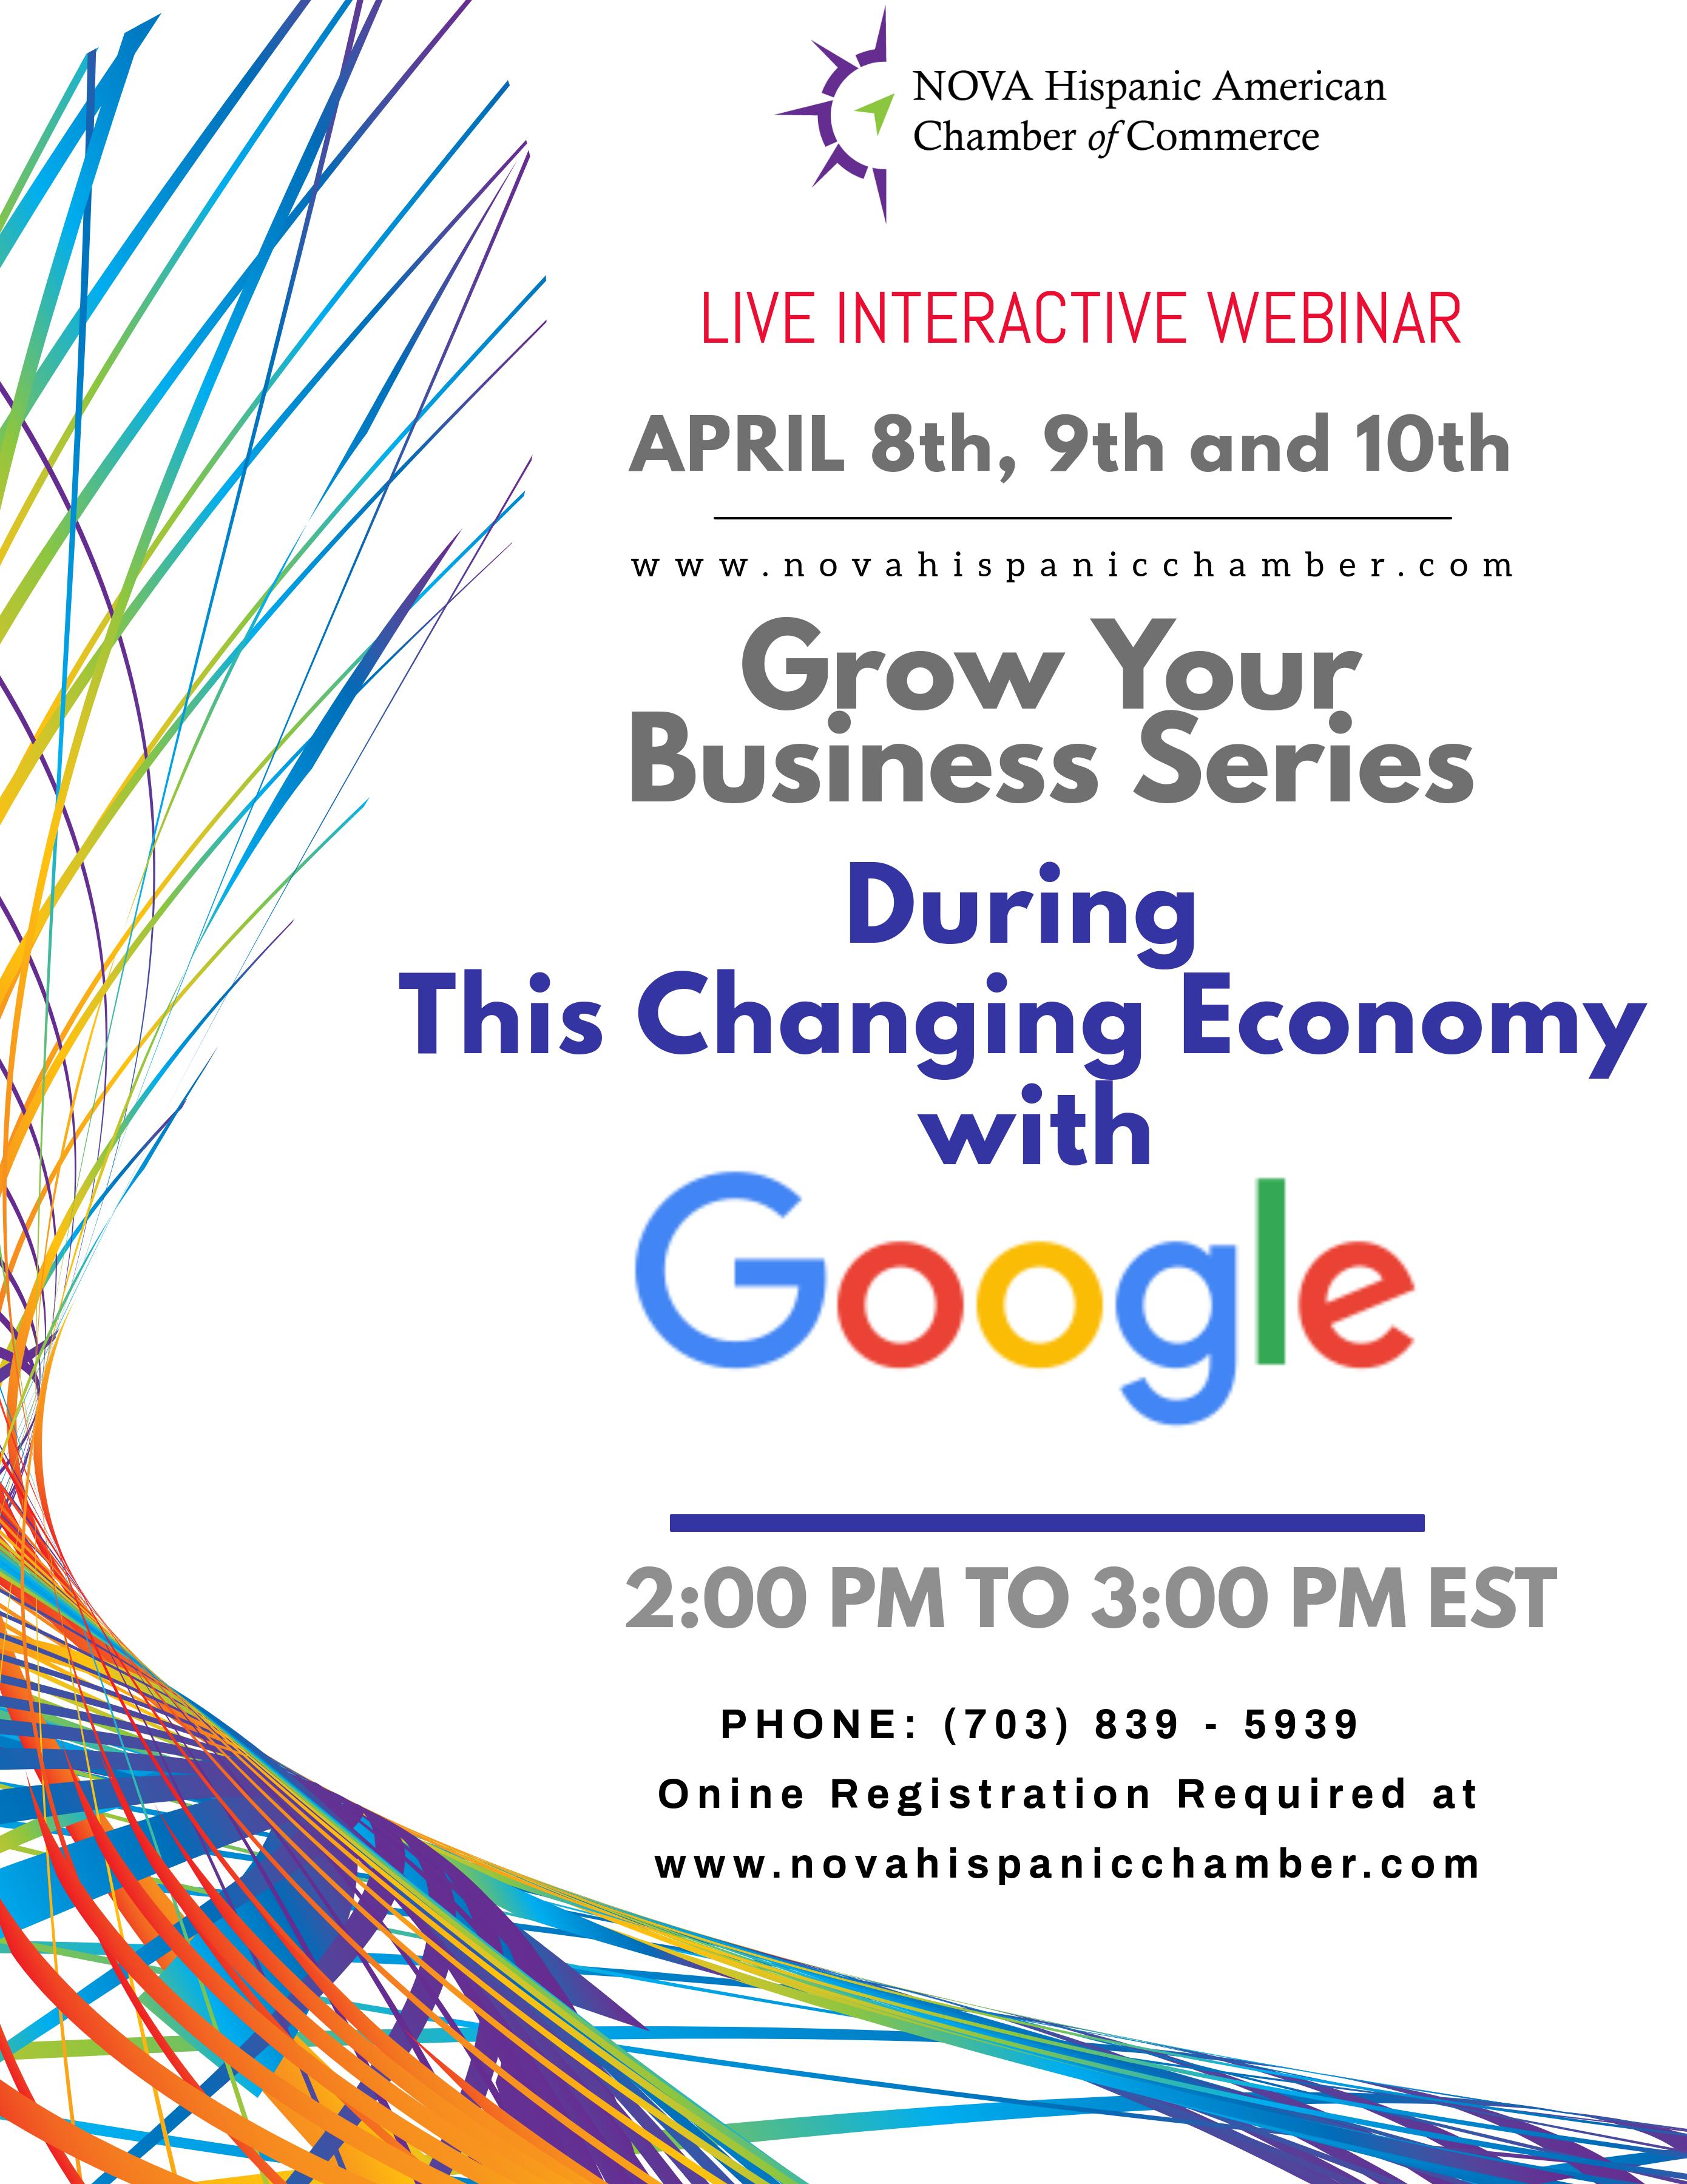 Grow Your Business with Google In A Changing Economy